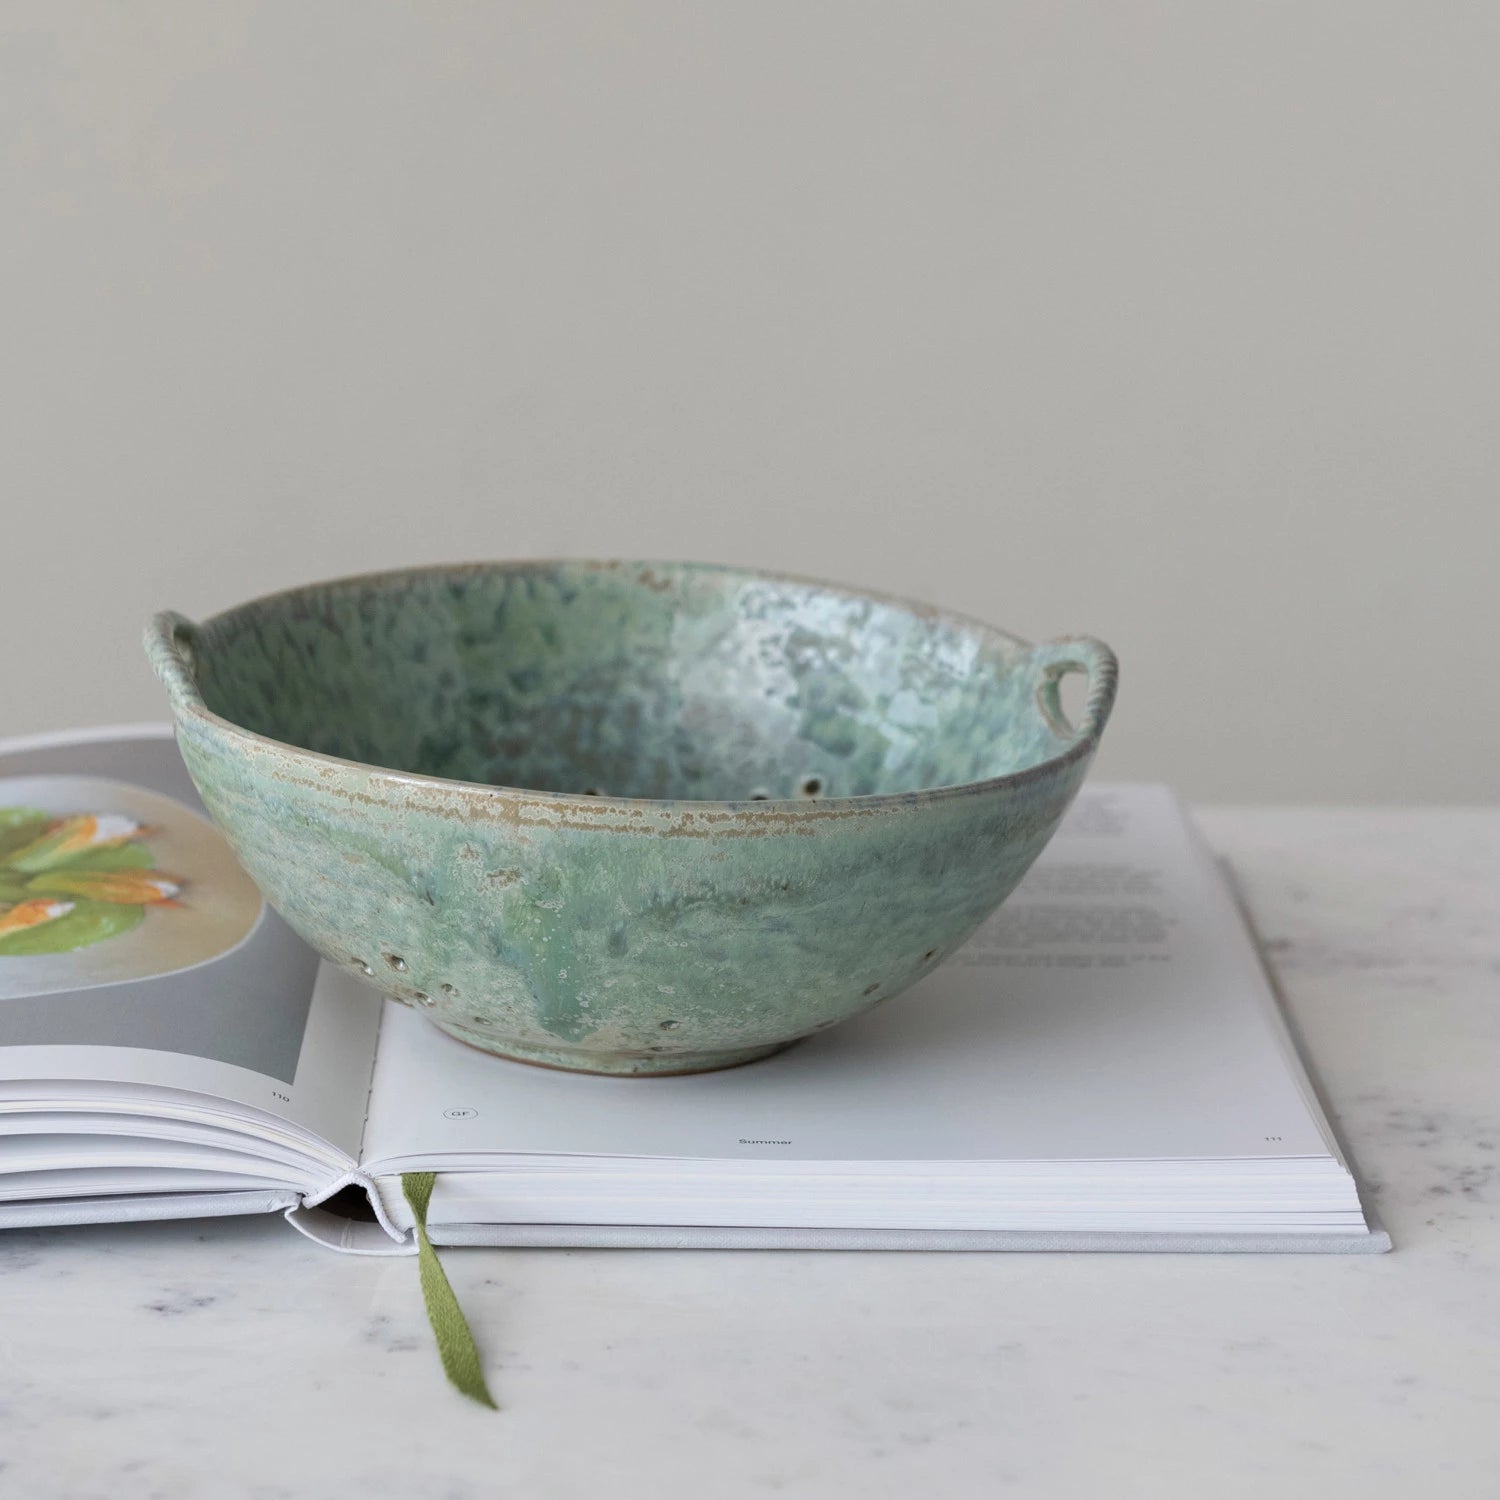 Creative Co-op - Stoneware Berry Bowl with Handles